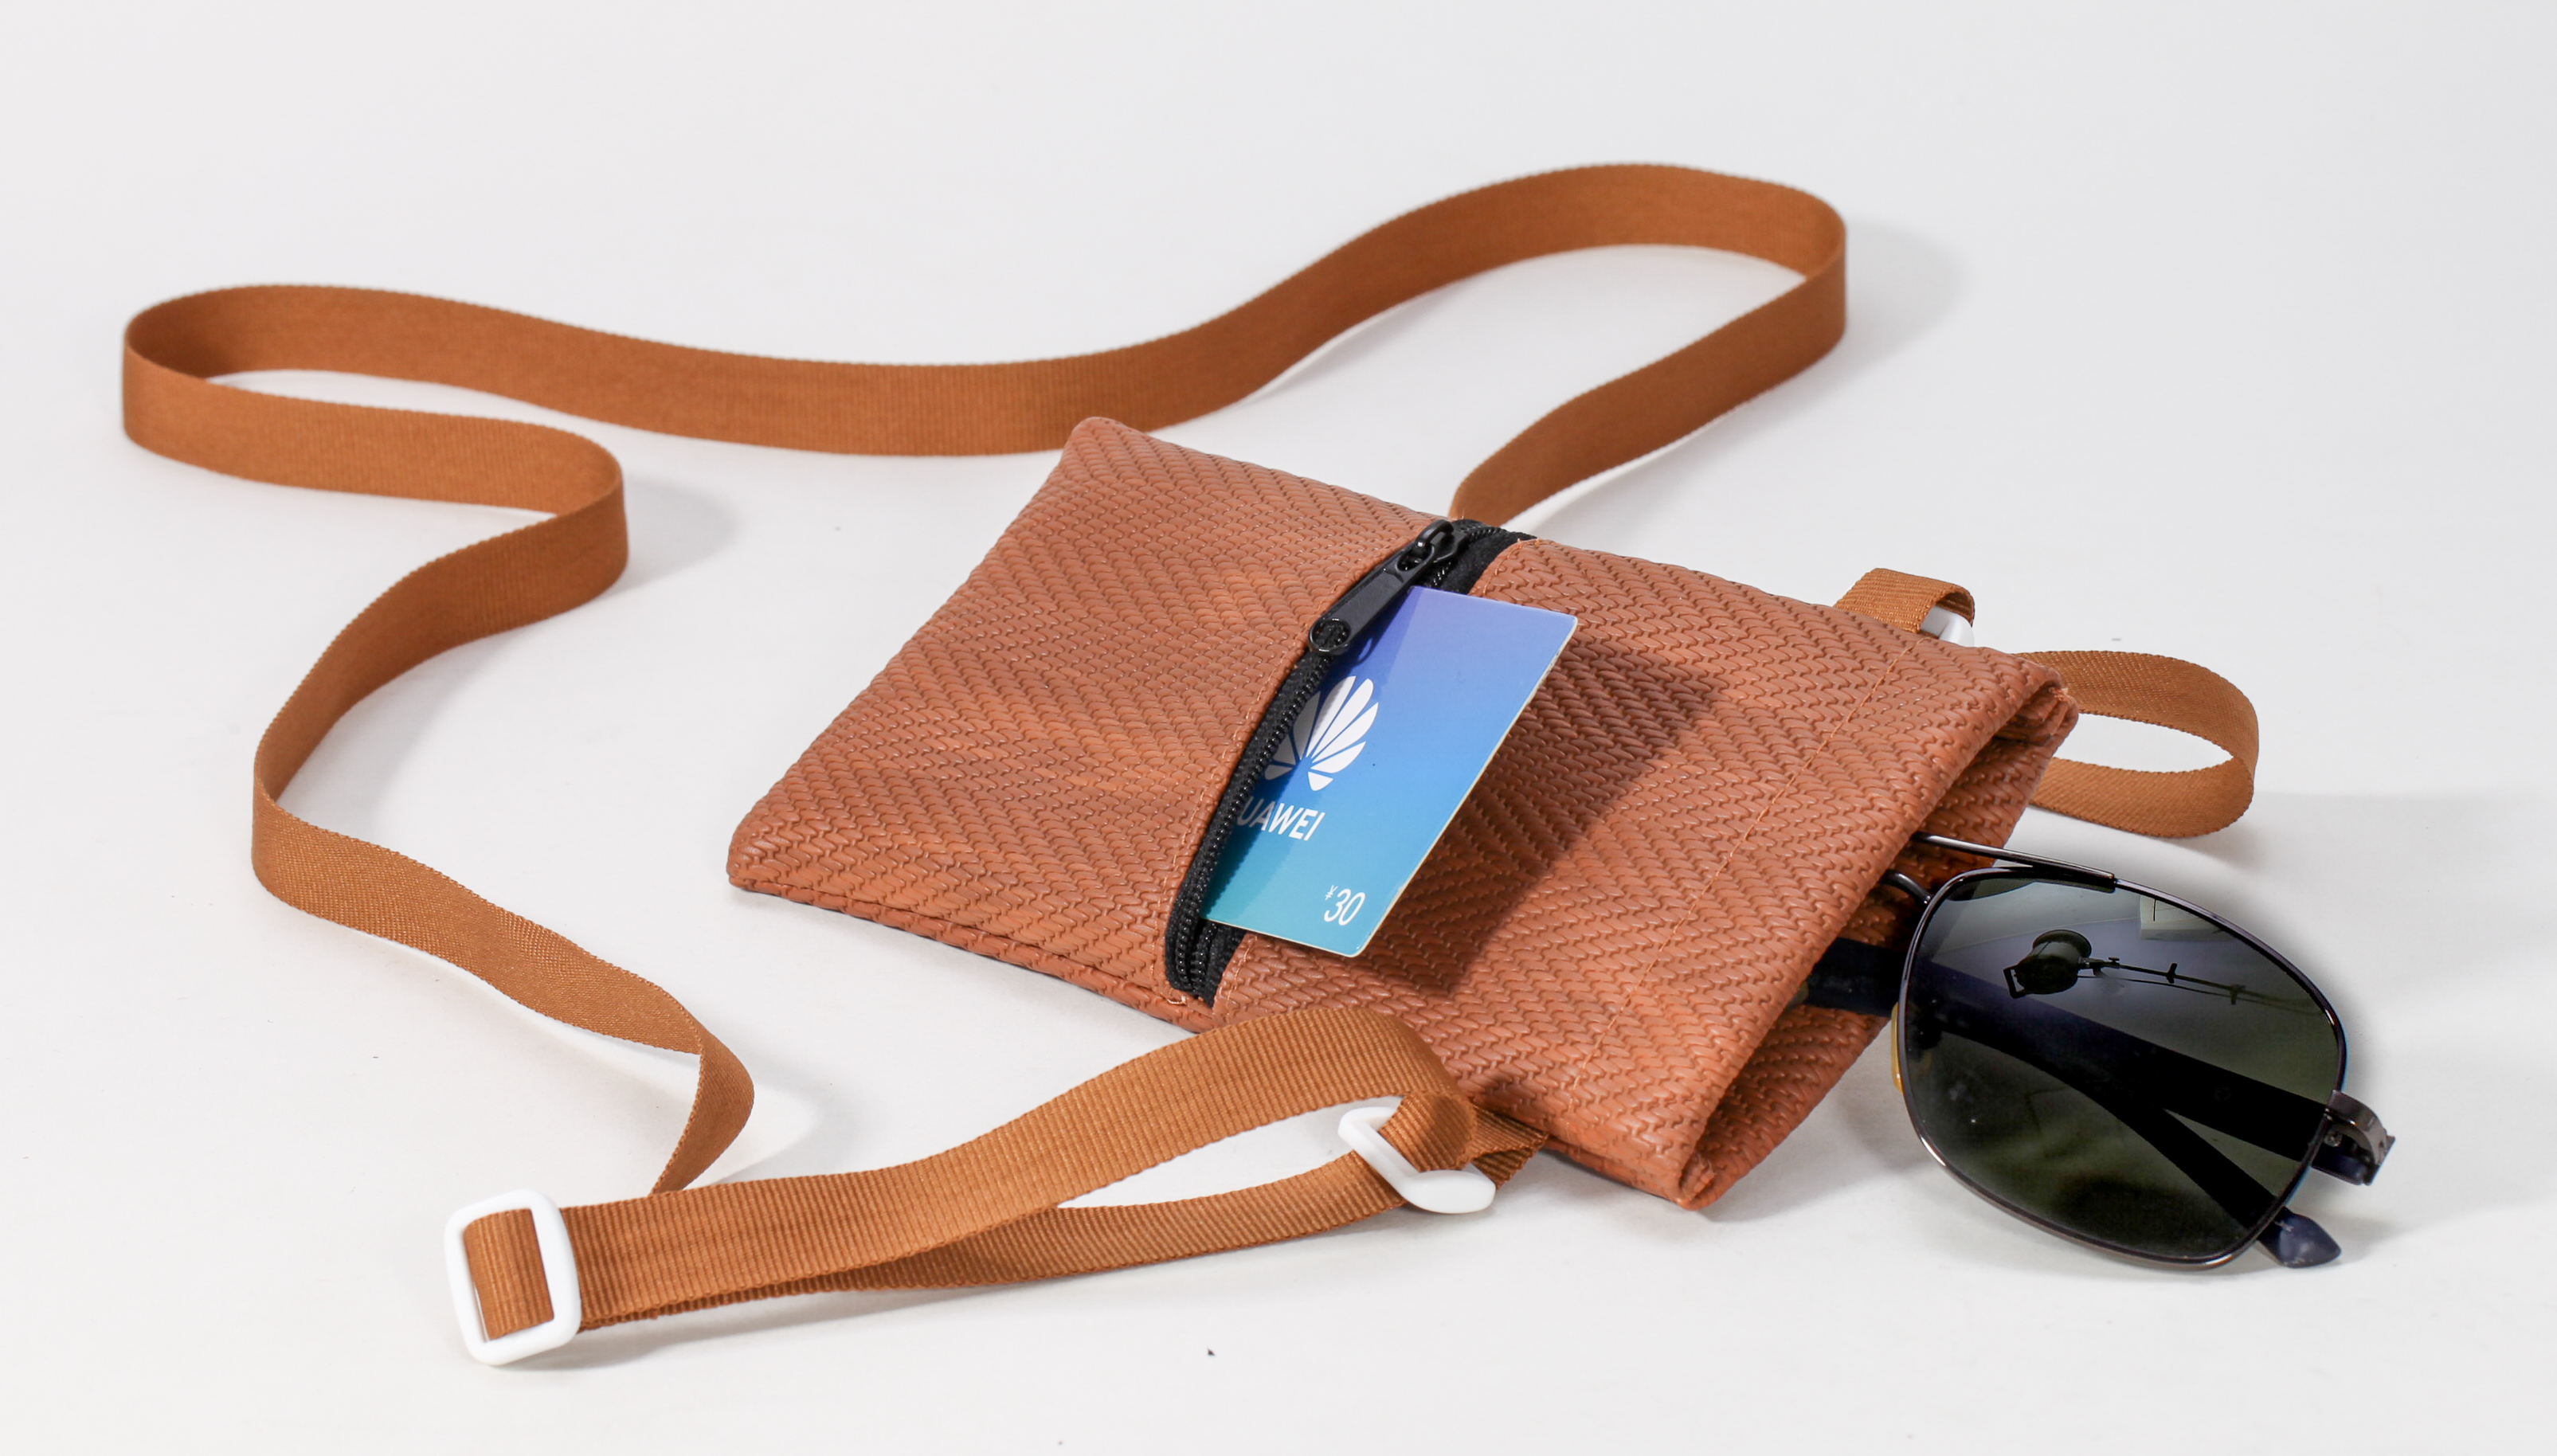 2021 Sunglasses Come in 5 Colors with A Strappy Pocket To Store Your Phone Or Glasses